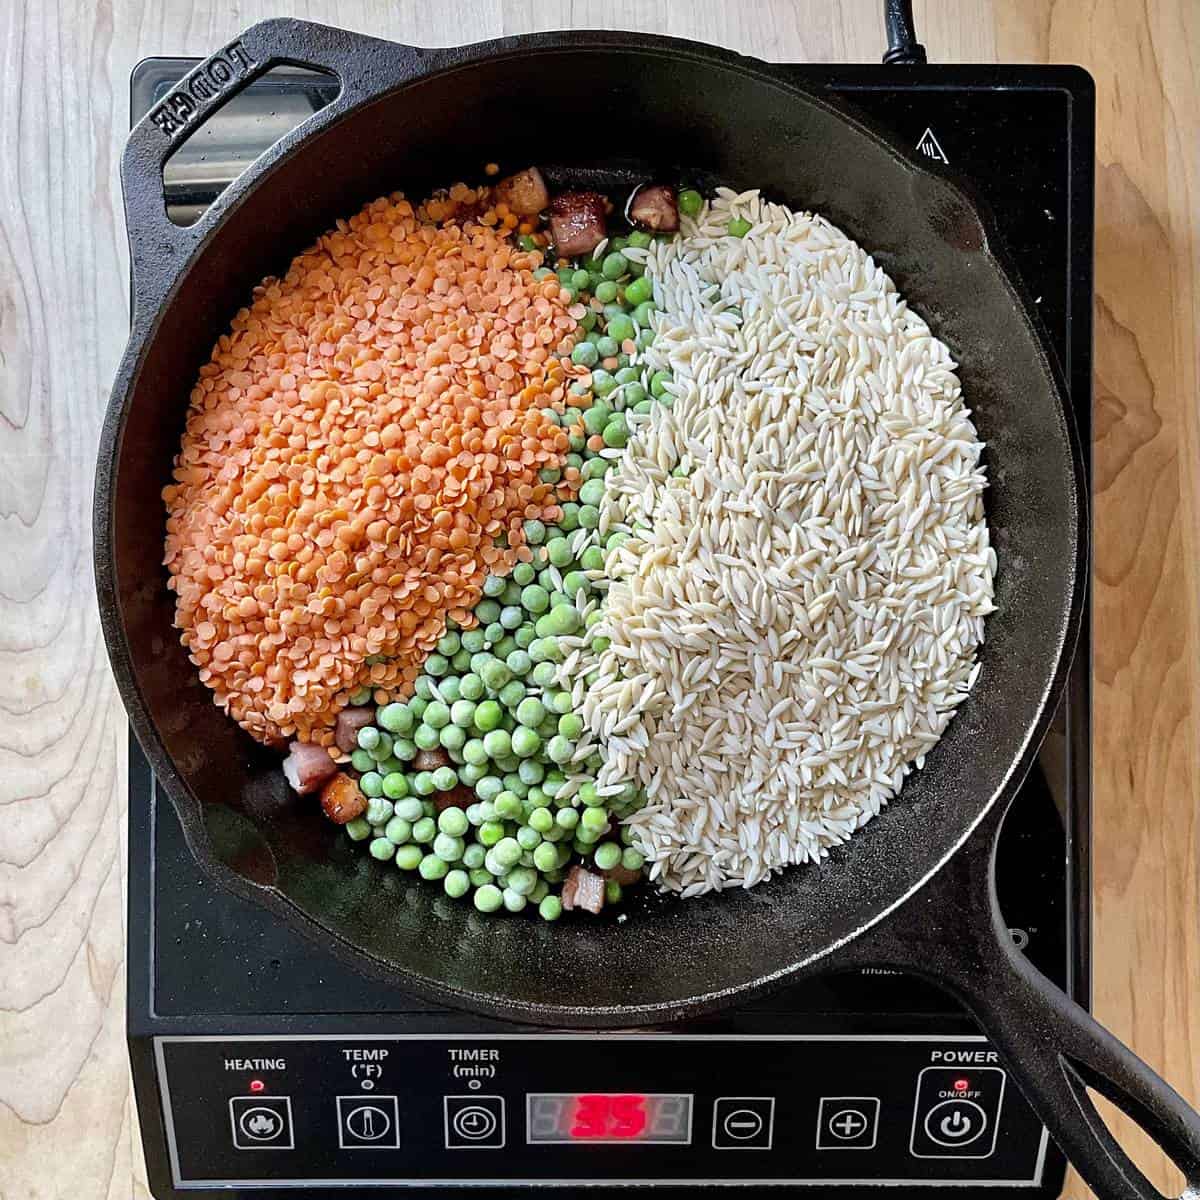 Red lentils, frozen peas and orzo pasta added to pancetta in a cast iron pan.